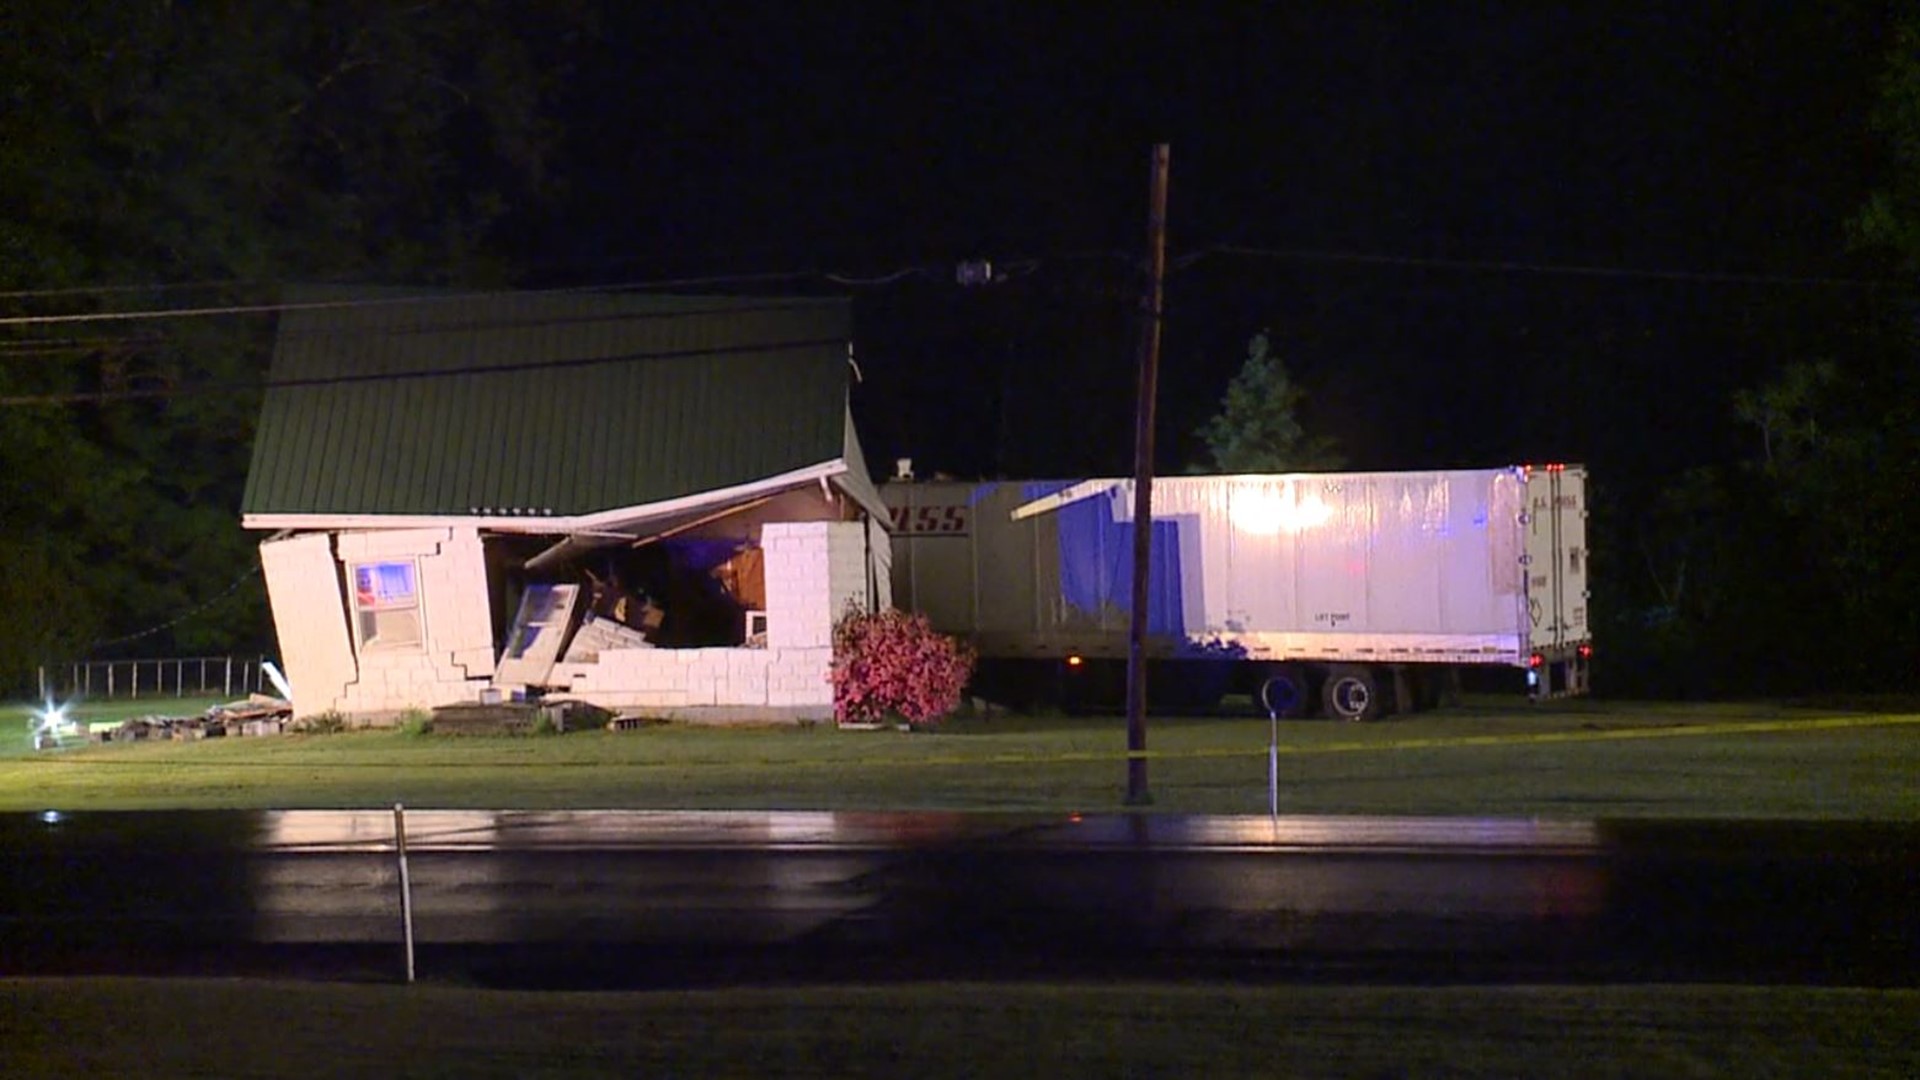 The tractor-trailer knocked the house off its foundation in Eaton Township.